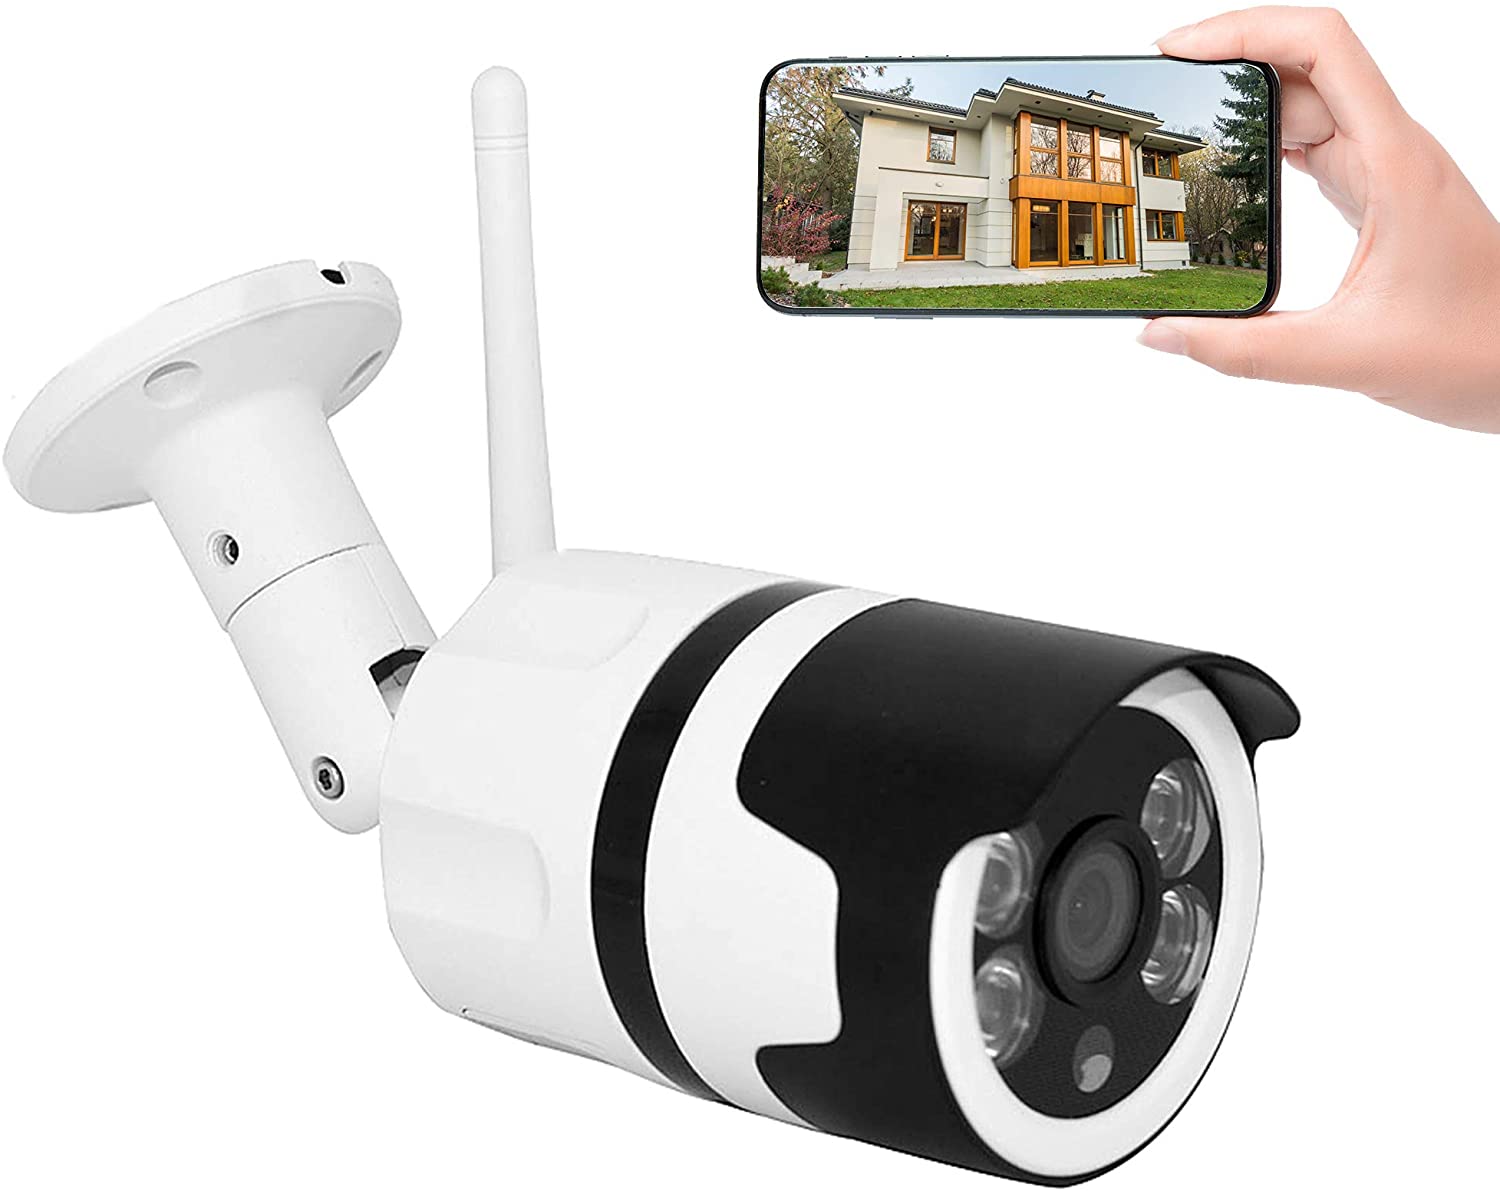 Security Camera Outdoor wireless, Waterproof WiFi IP Camera with FHD 1080P, 180° Wide Angle. - e4cents